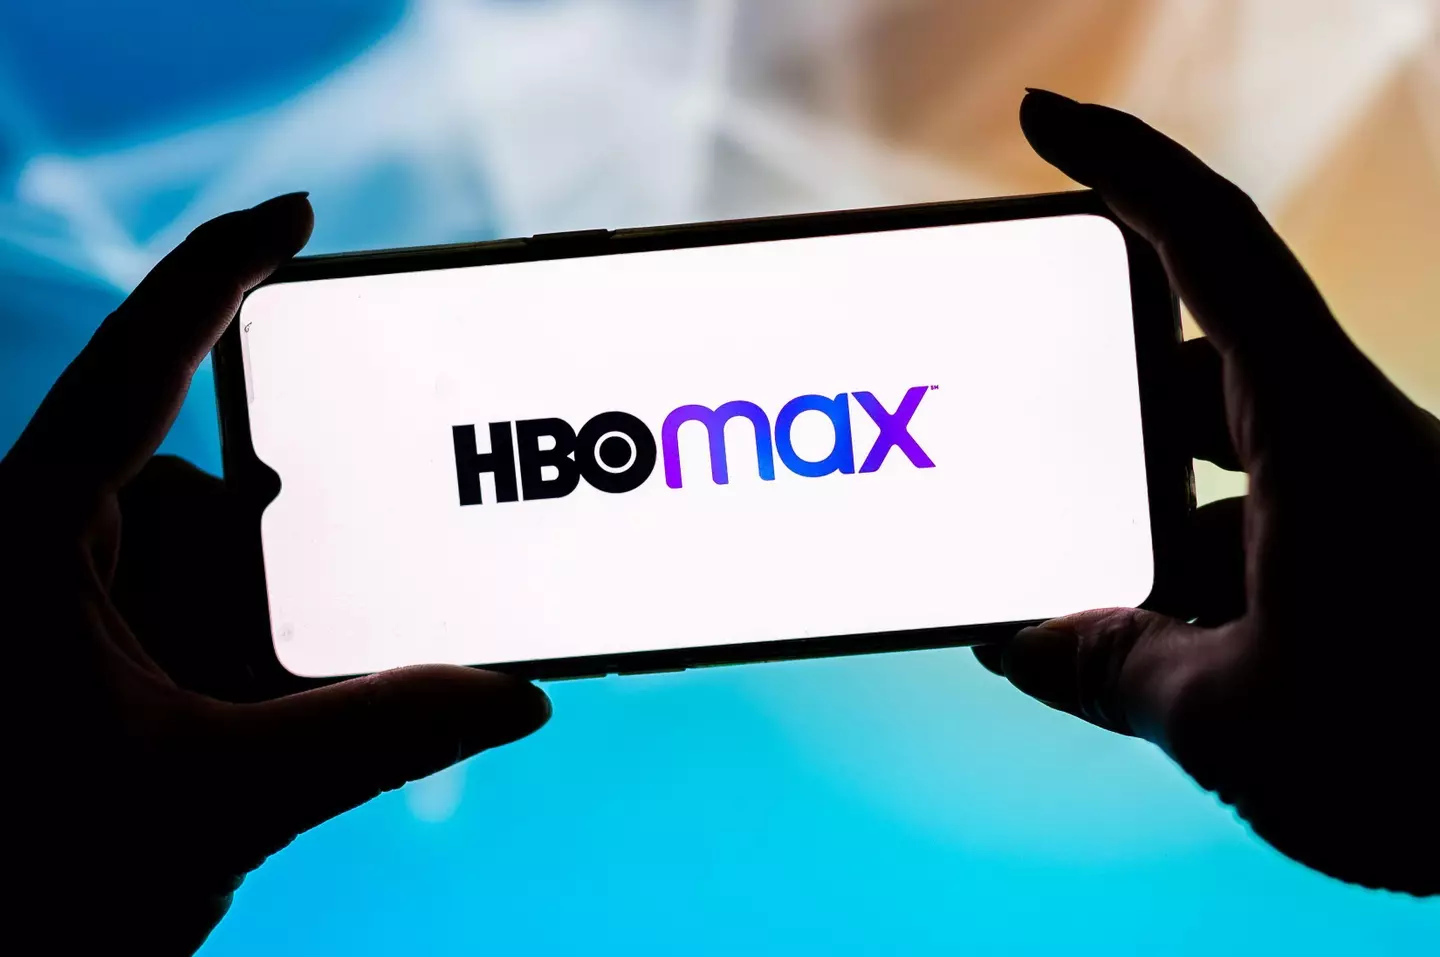 The 2019 licensing deal cost HBO Max a whopping $500,000.